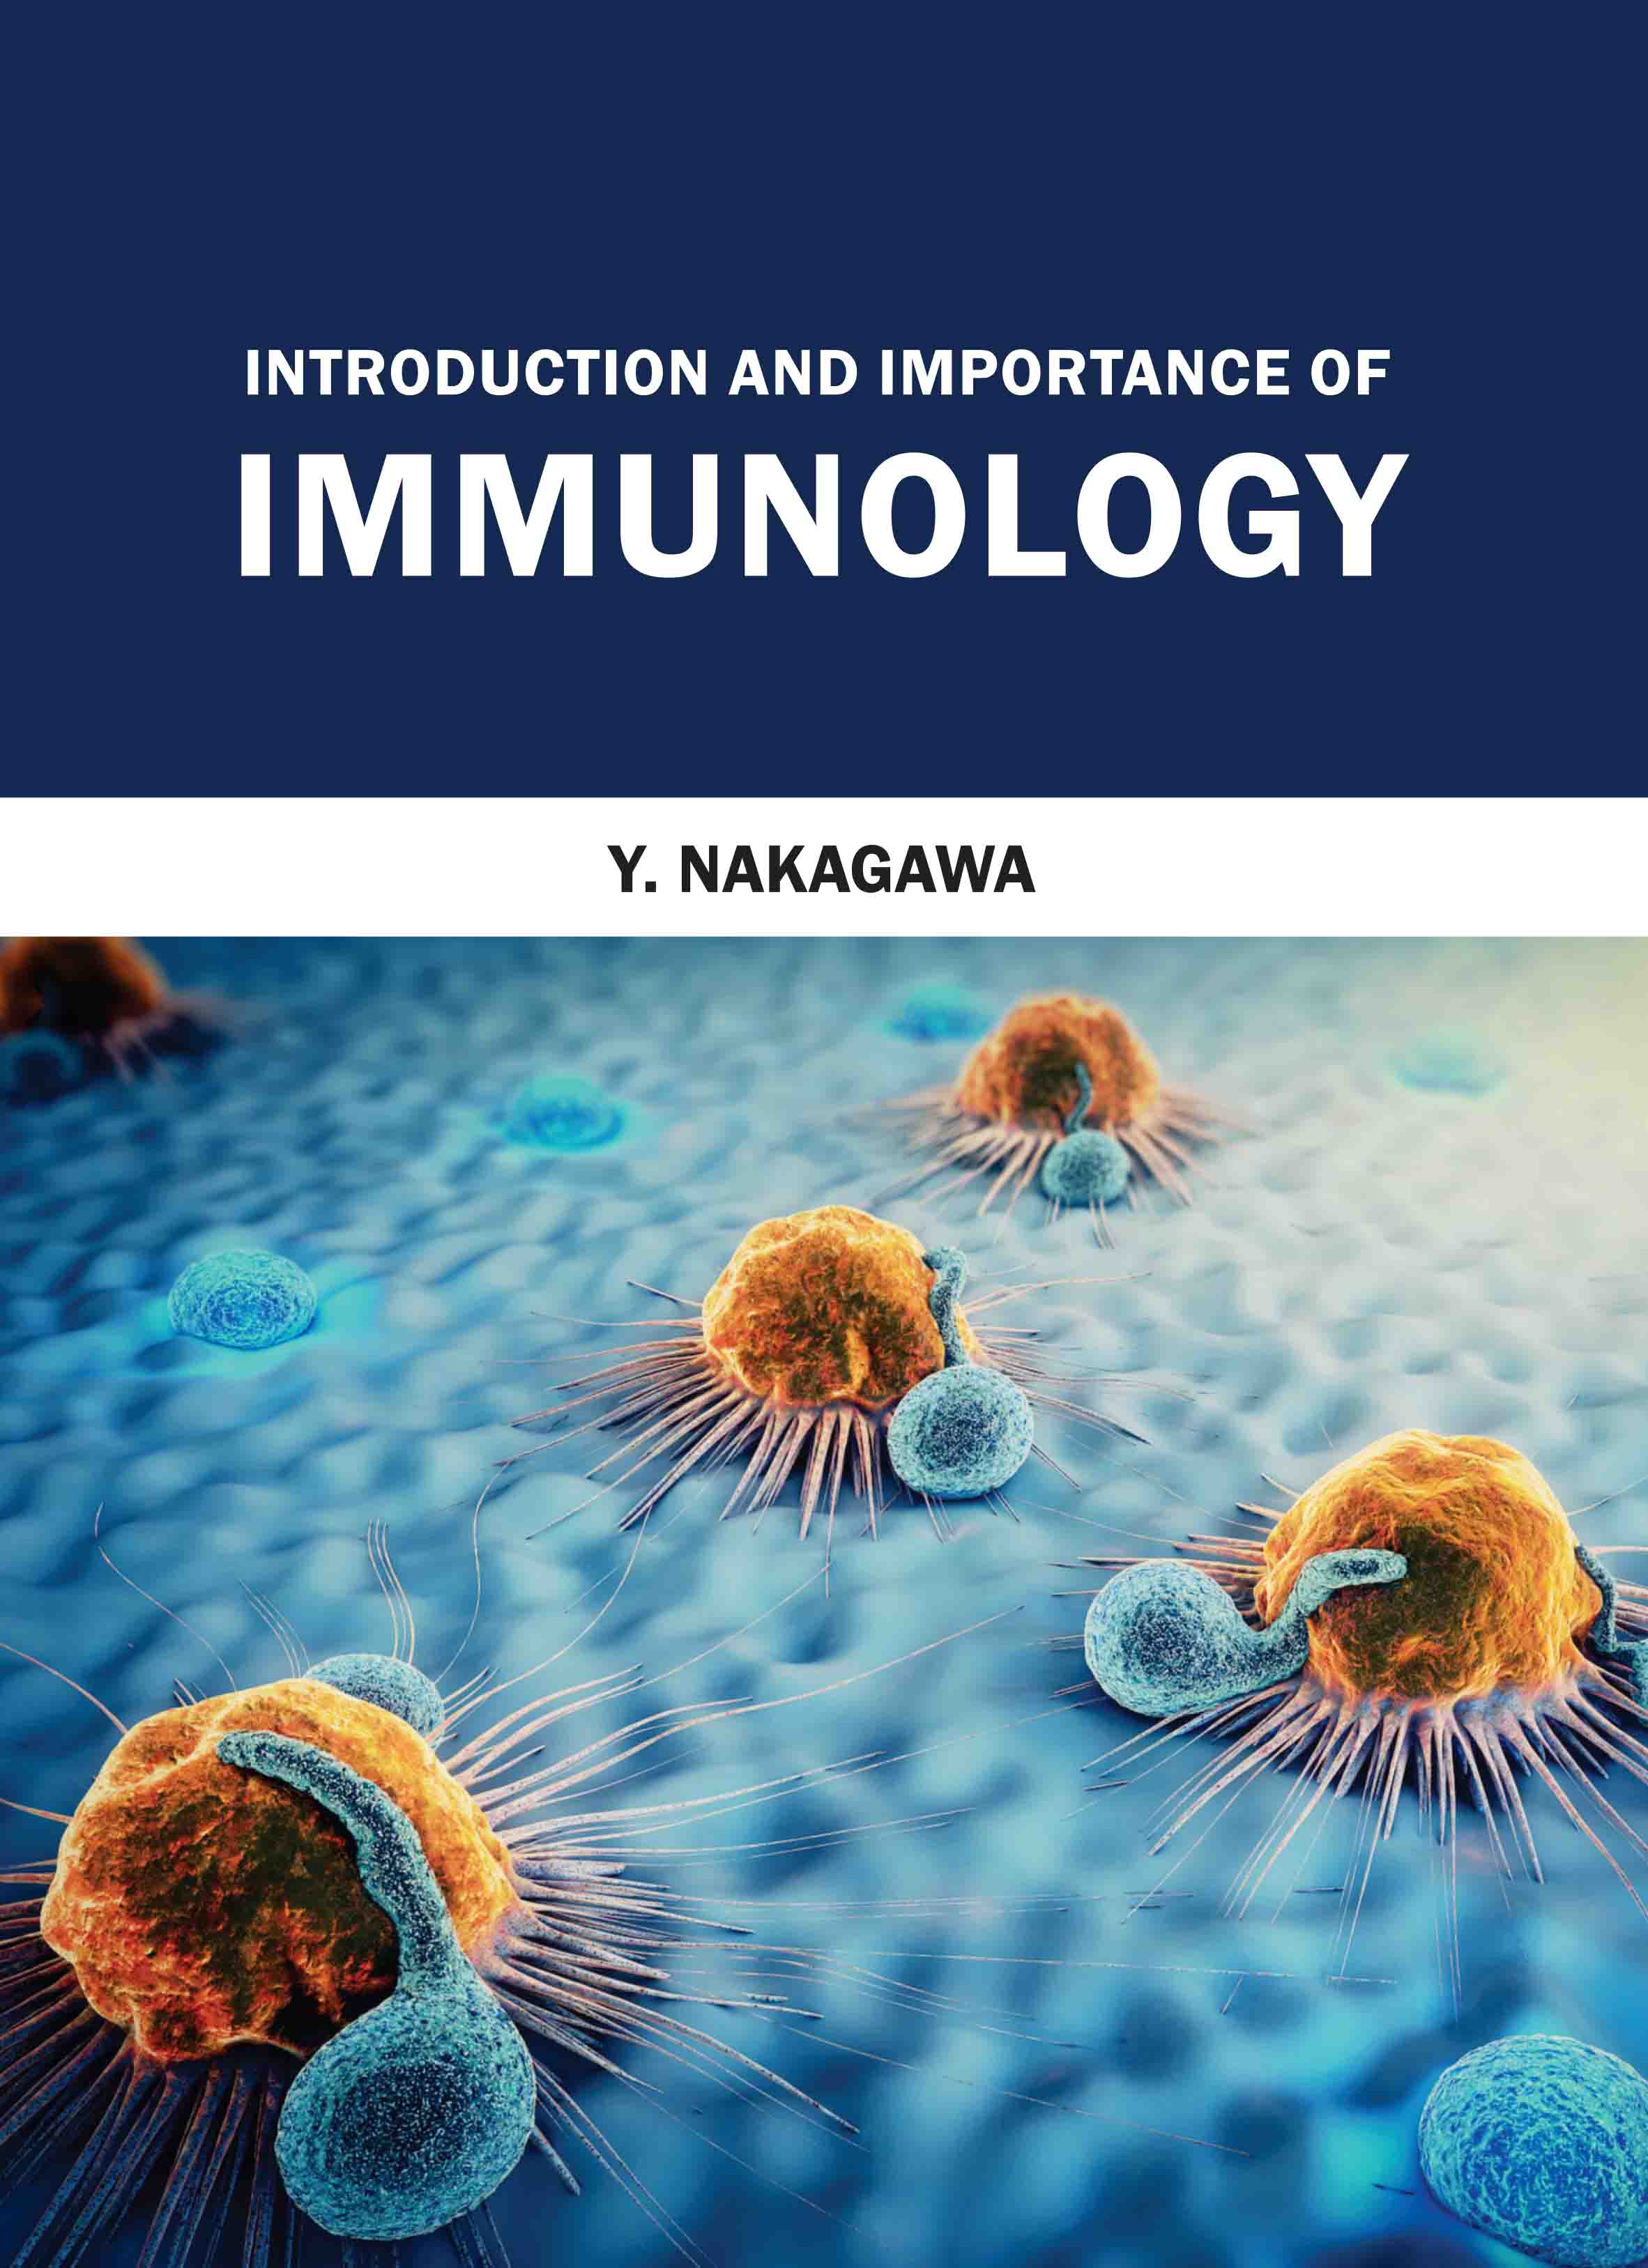 Introduction and Importance of Immunology